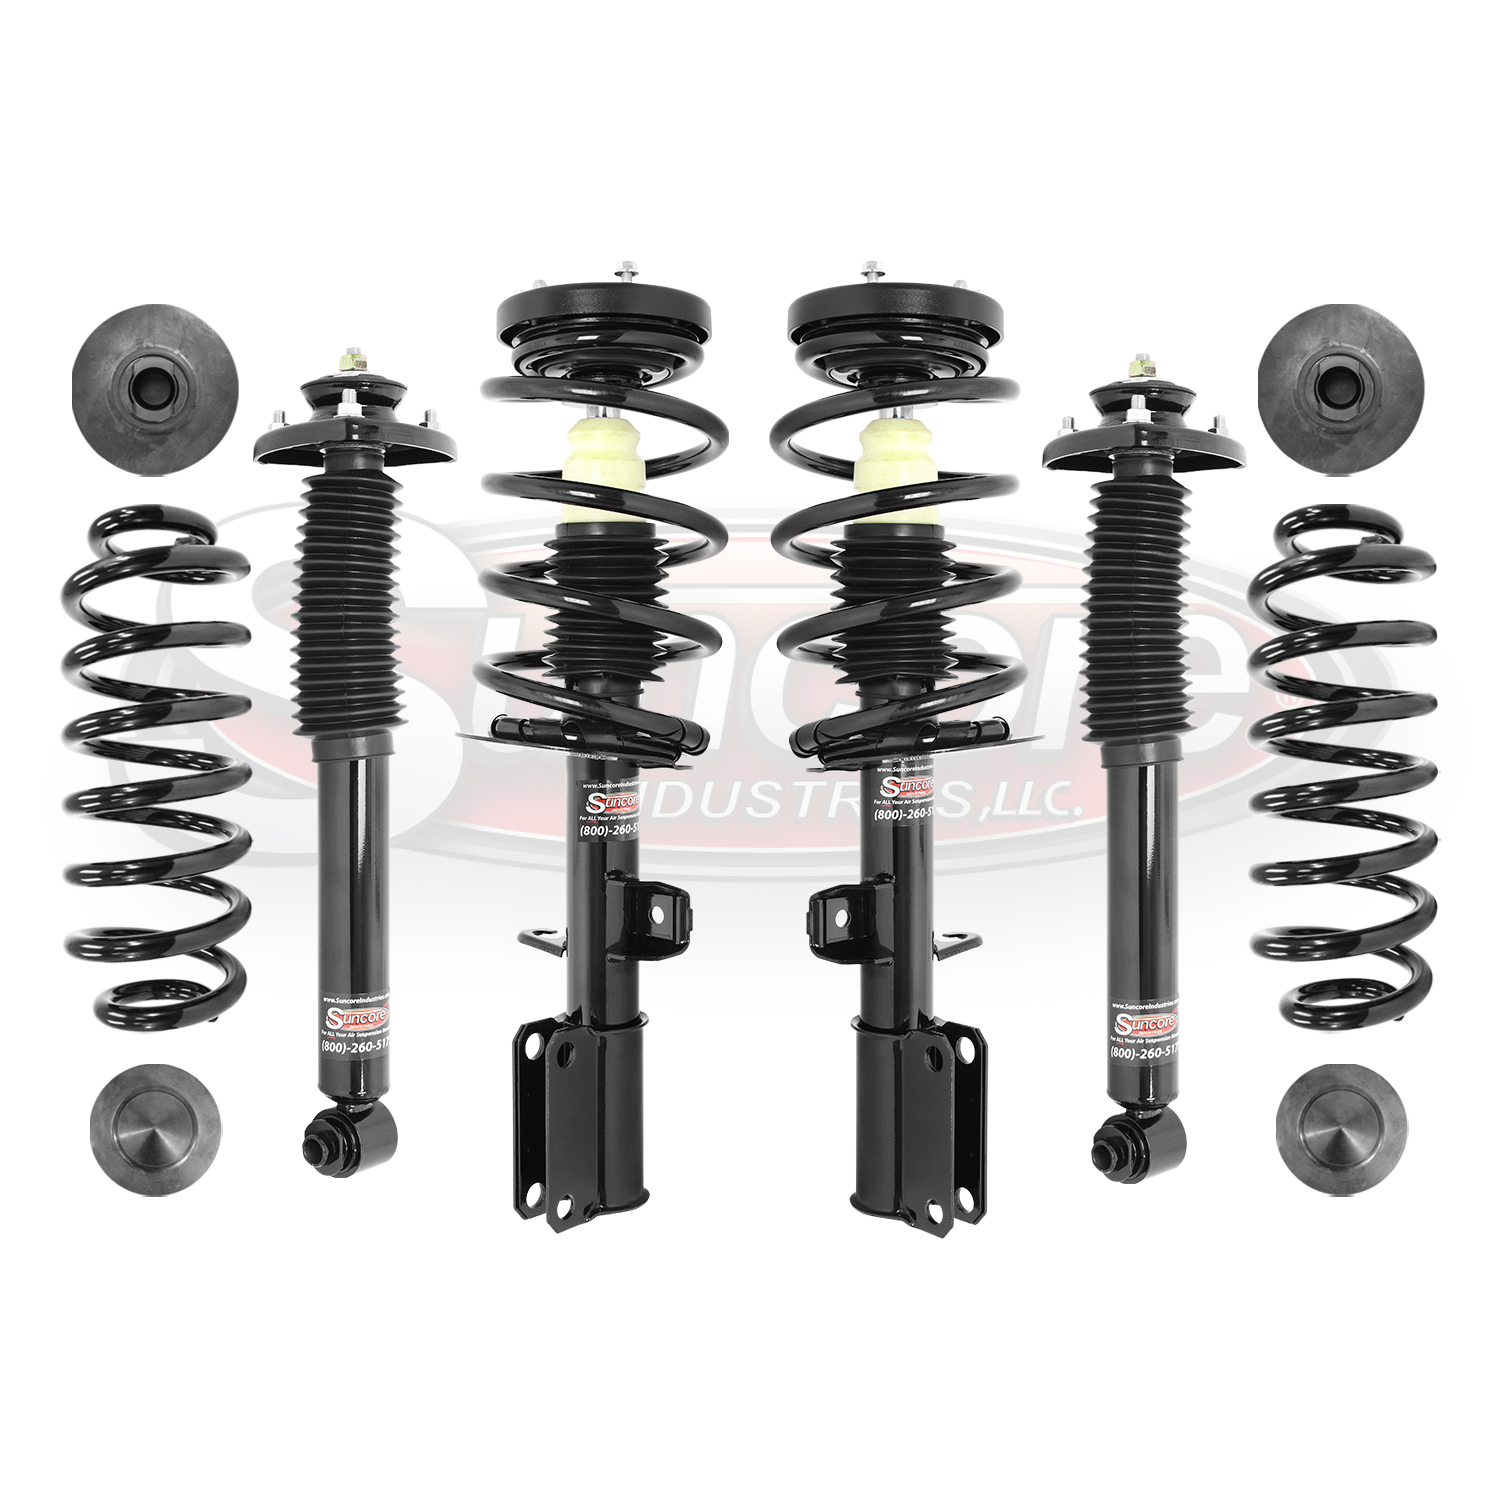 Air to Complete Struts & Coil Springs Conversion Kit for 2000-2006 BMW X5